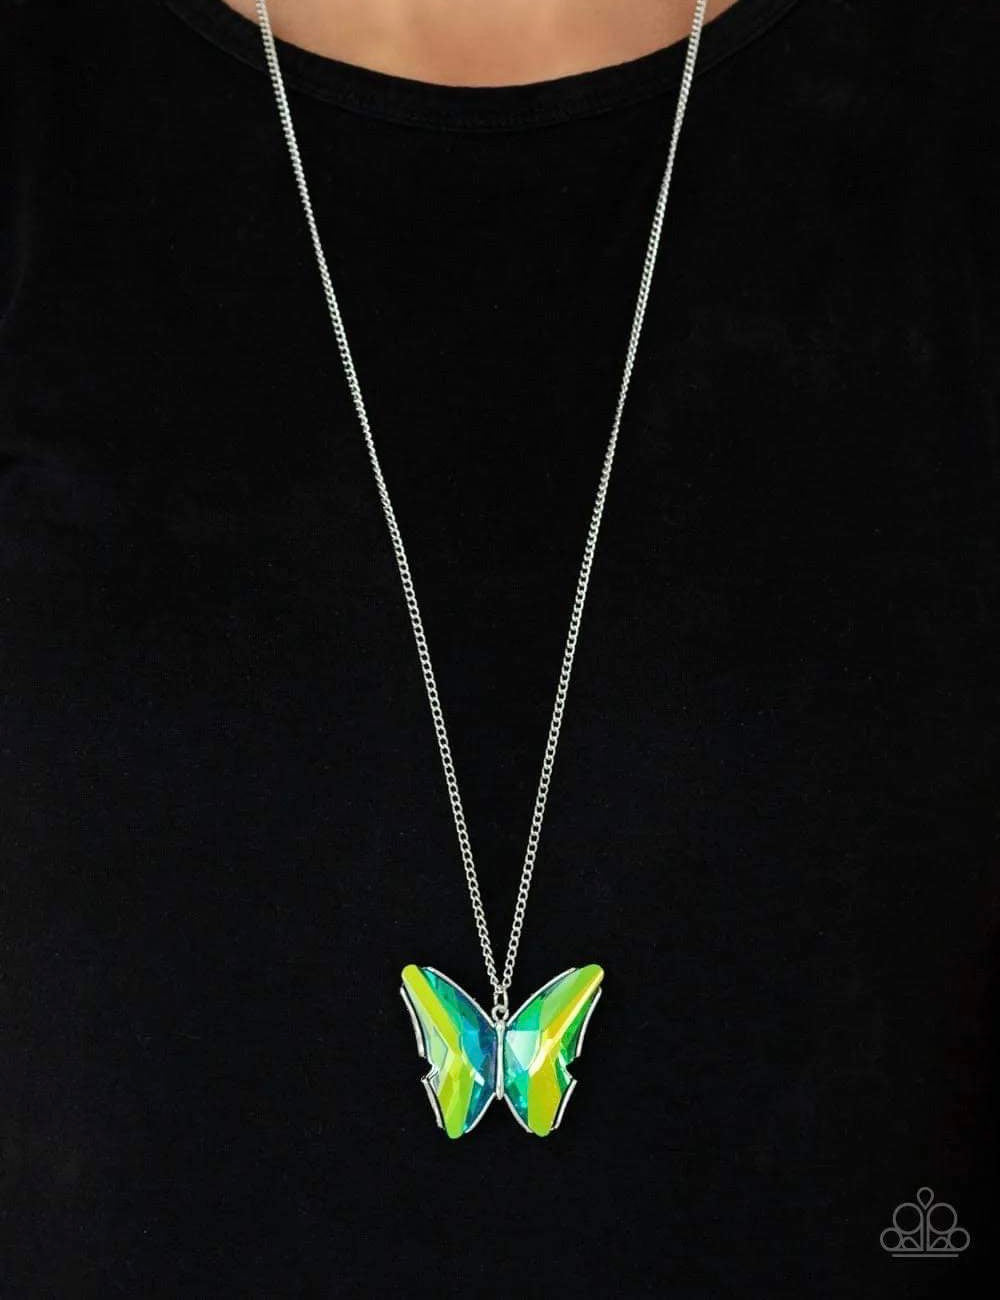 Paparazzi The Social Butterfly Effect Necklace - Green (Pink Diamond Exclusive)